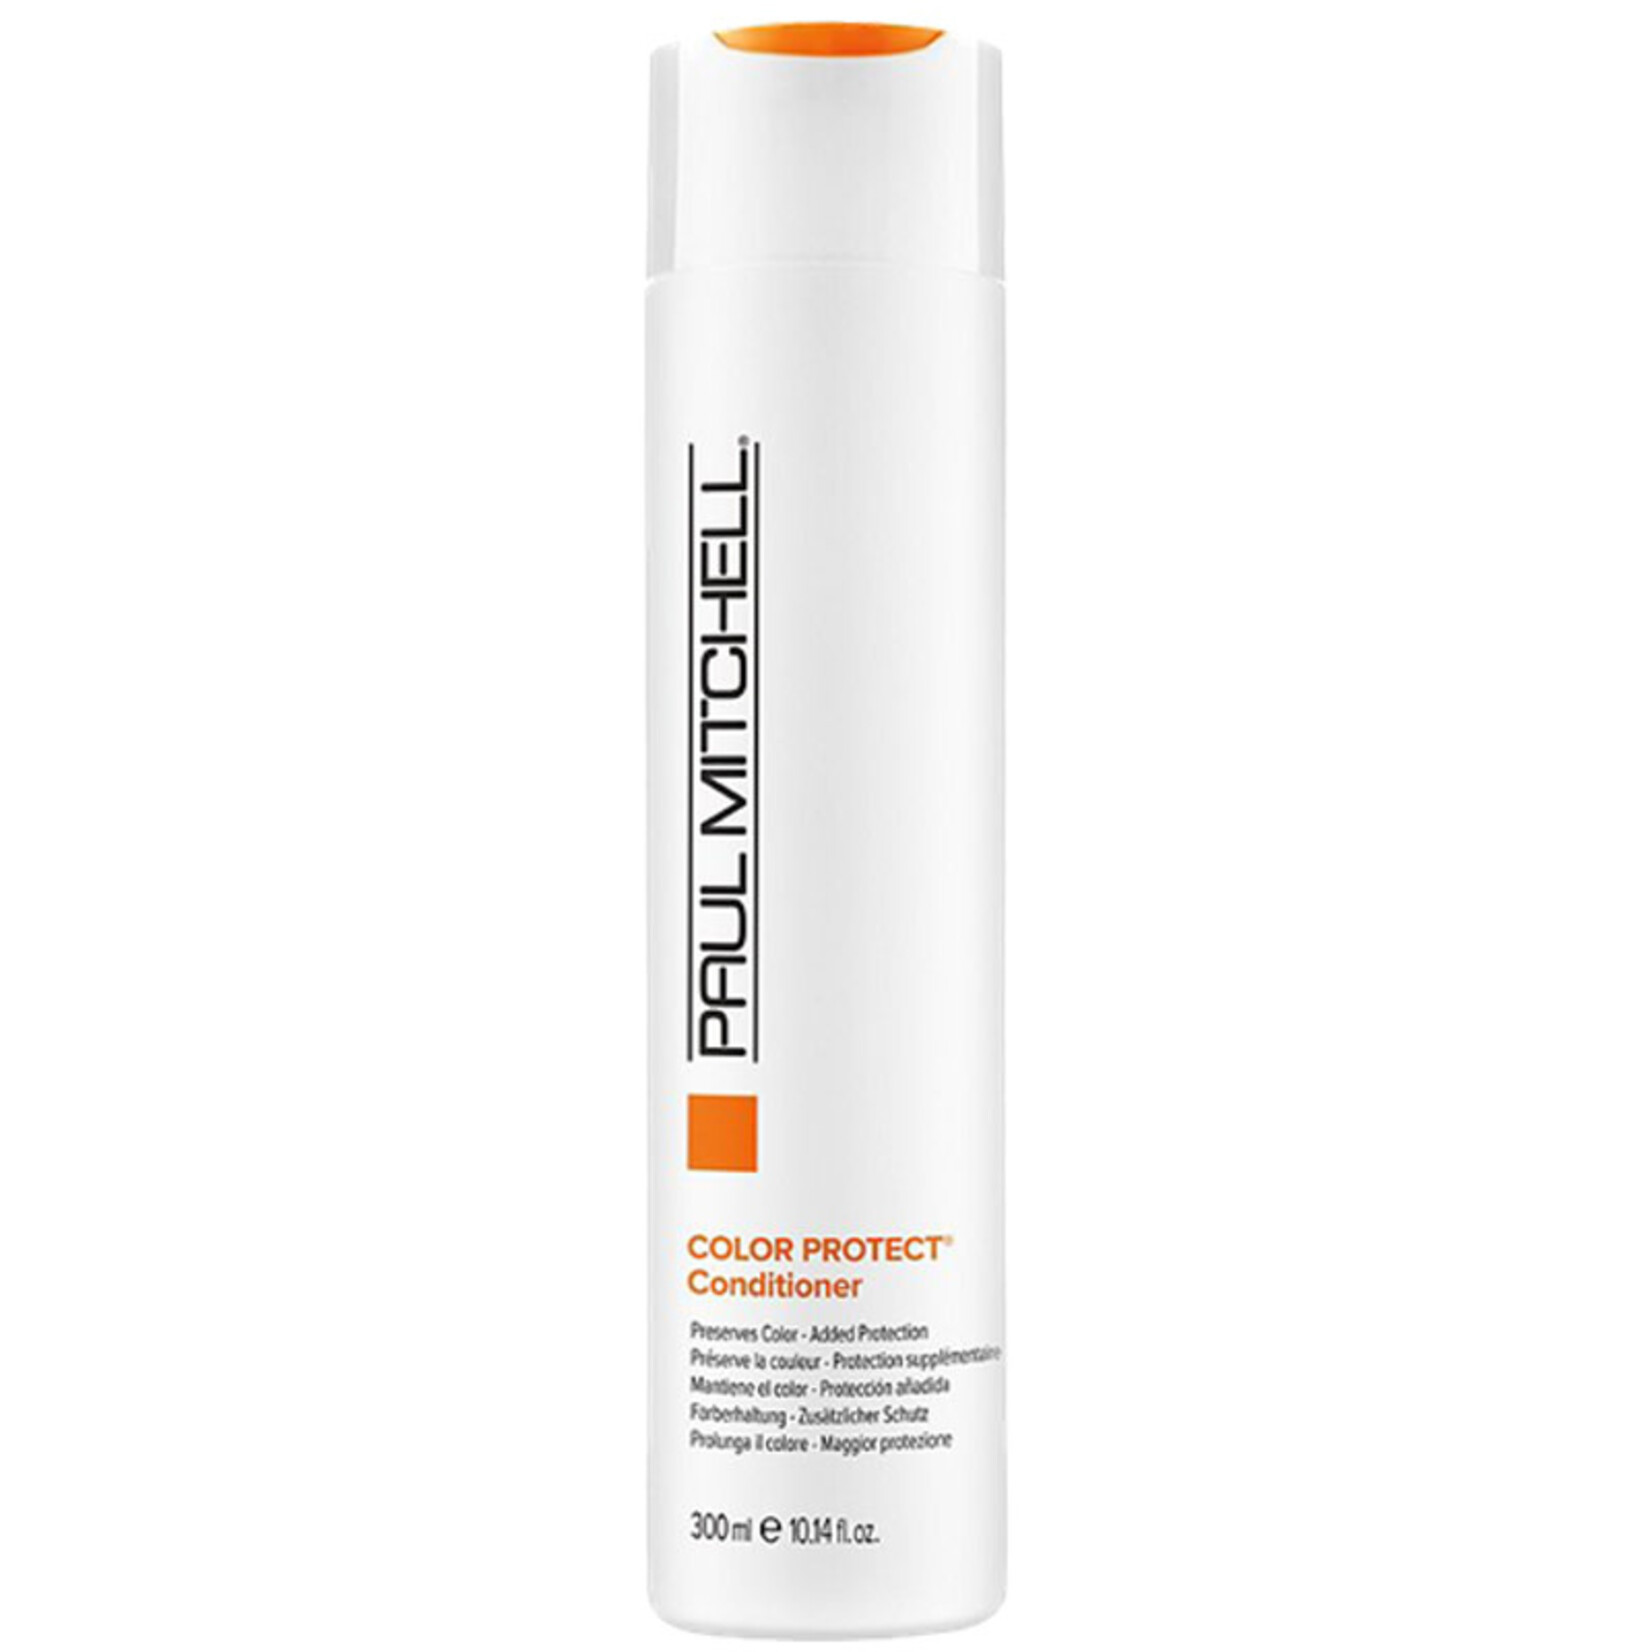 Paul Mitchell Paul Mitchell - Color Protect - Daily Conditioner 300ml